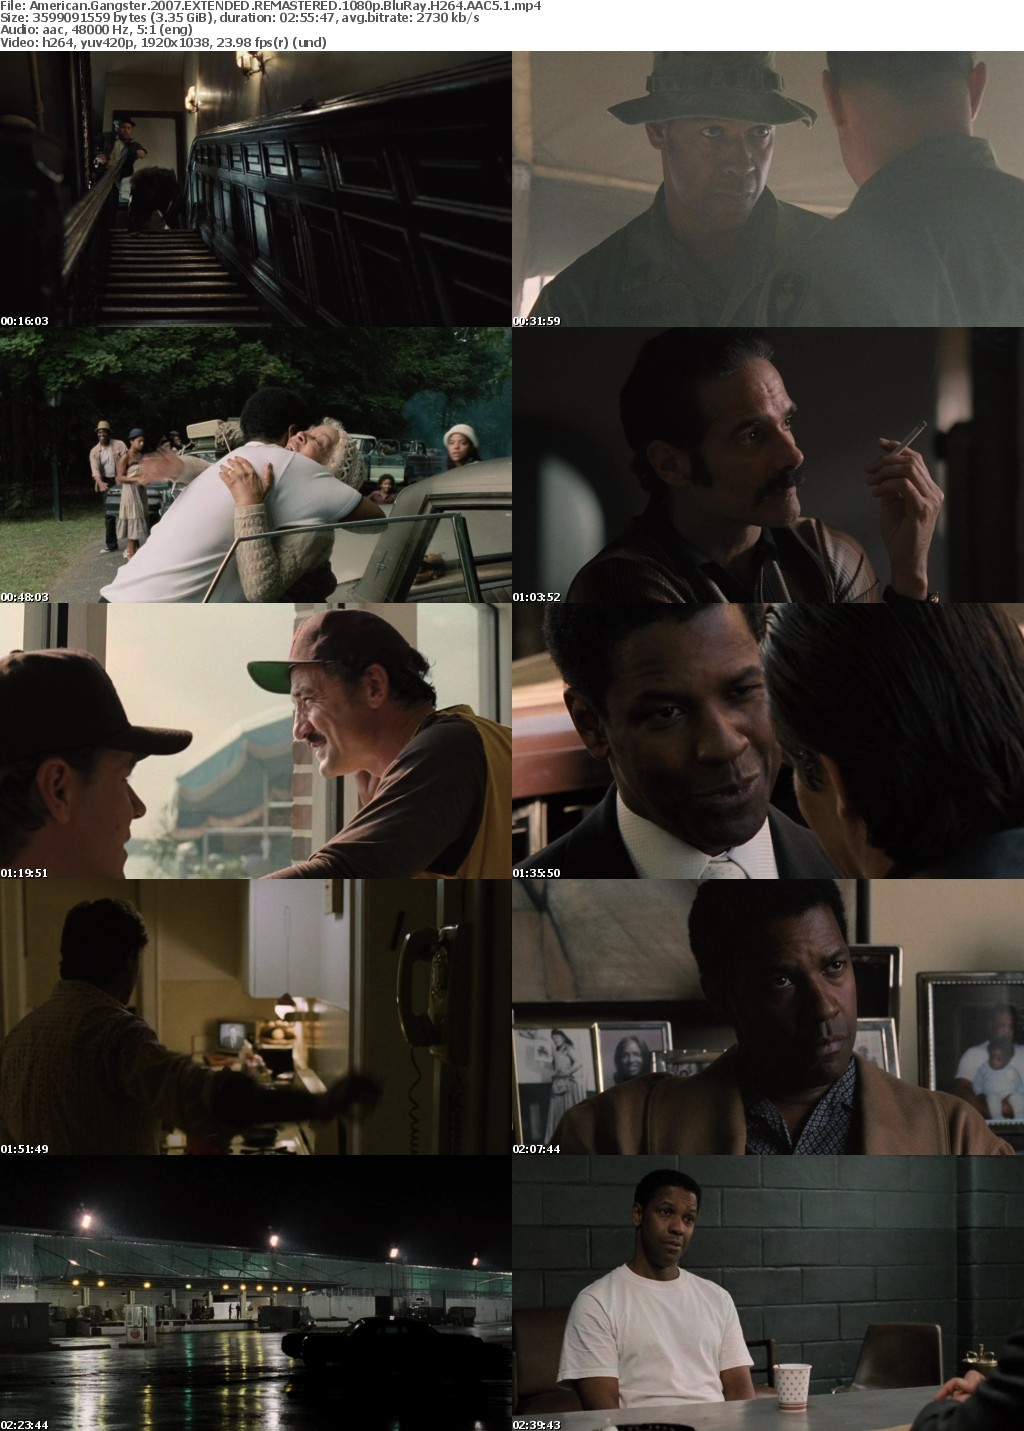 American Gangster 2007 EXTENDED REMASTERED 1080p BluRay H264 AAC5 1 88